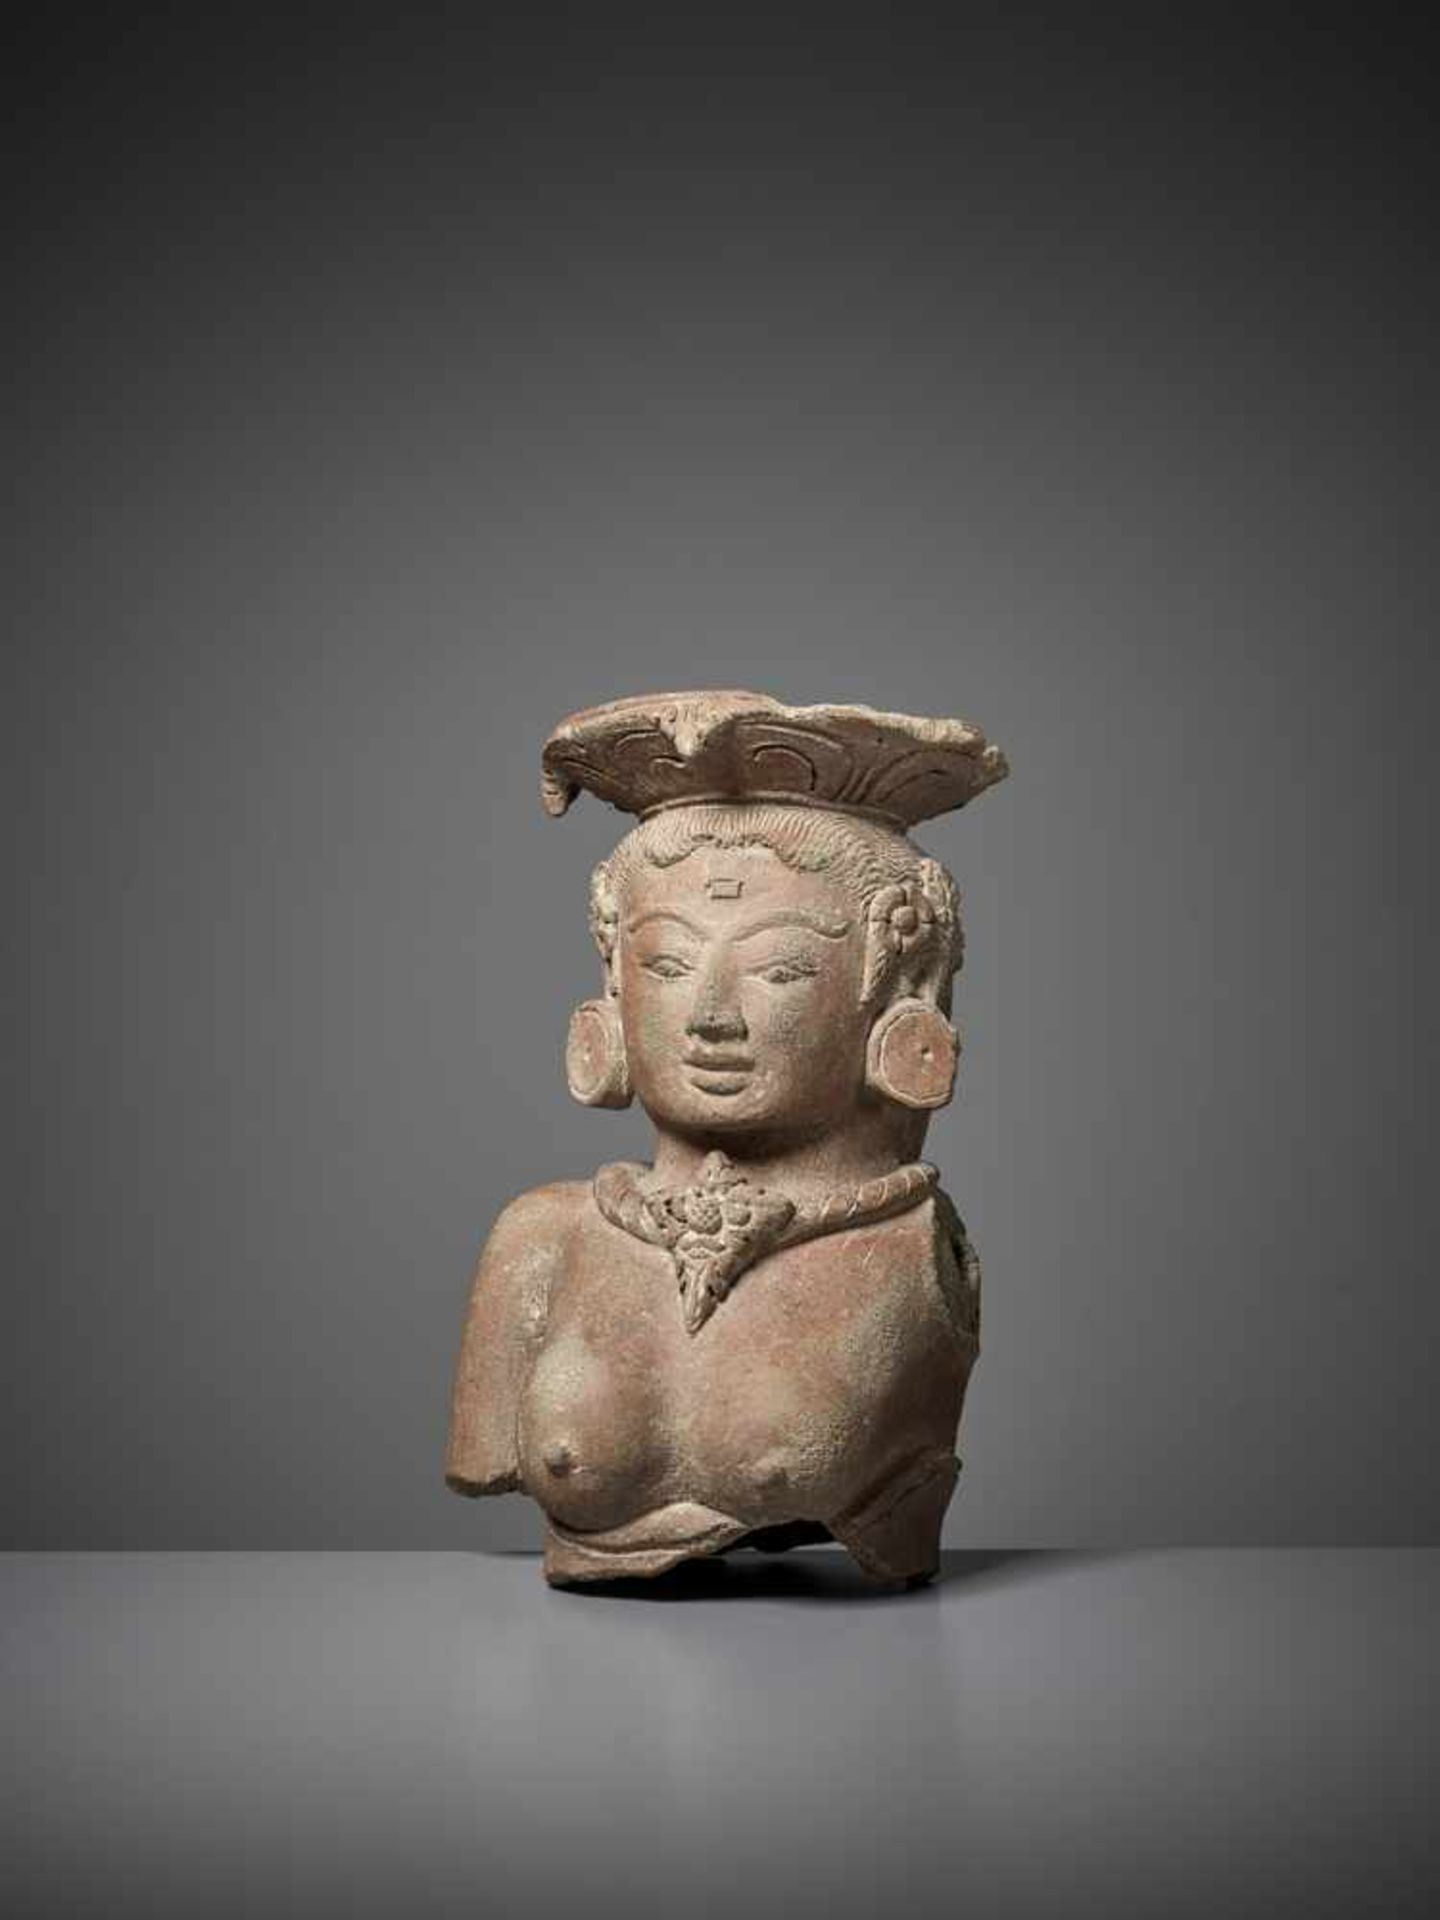 A FEMALE MAJAPAHIT TERRACOTTA BUST Indonesia, Java, 14th – 15th century. This elaborate and - Image 3 of 10